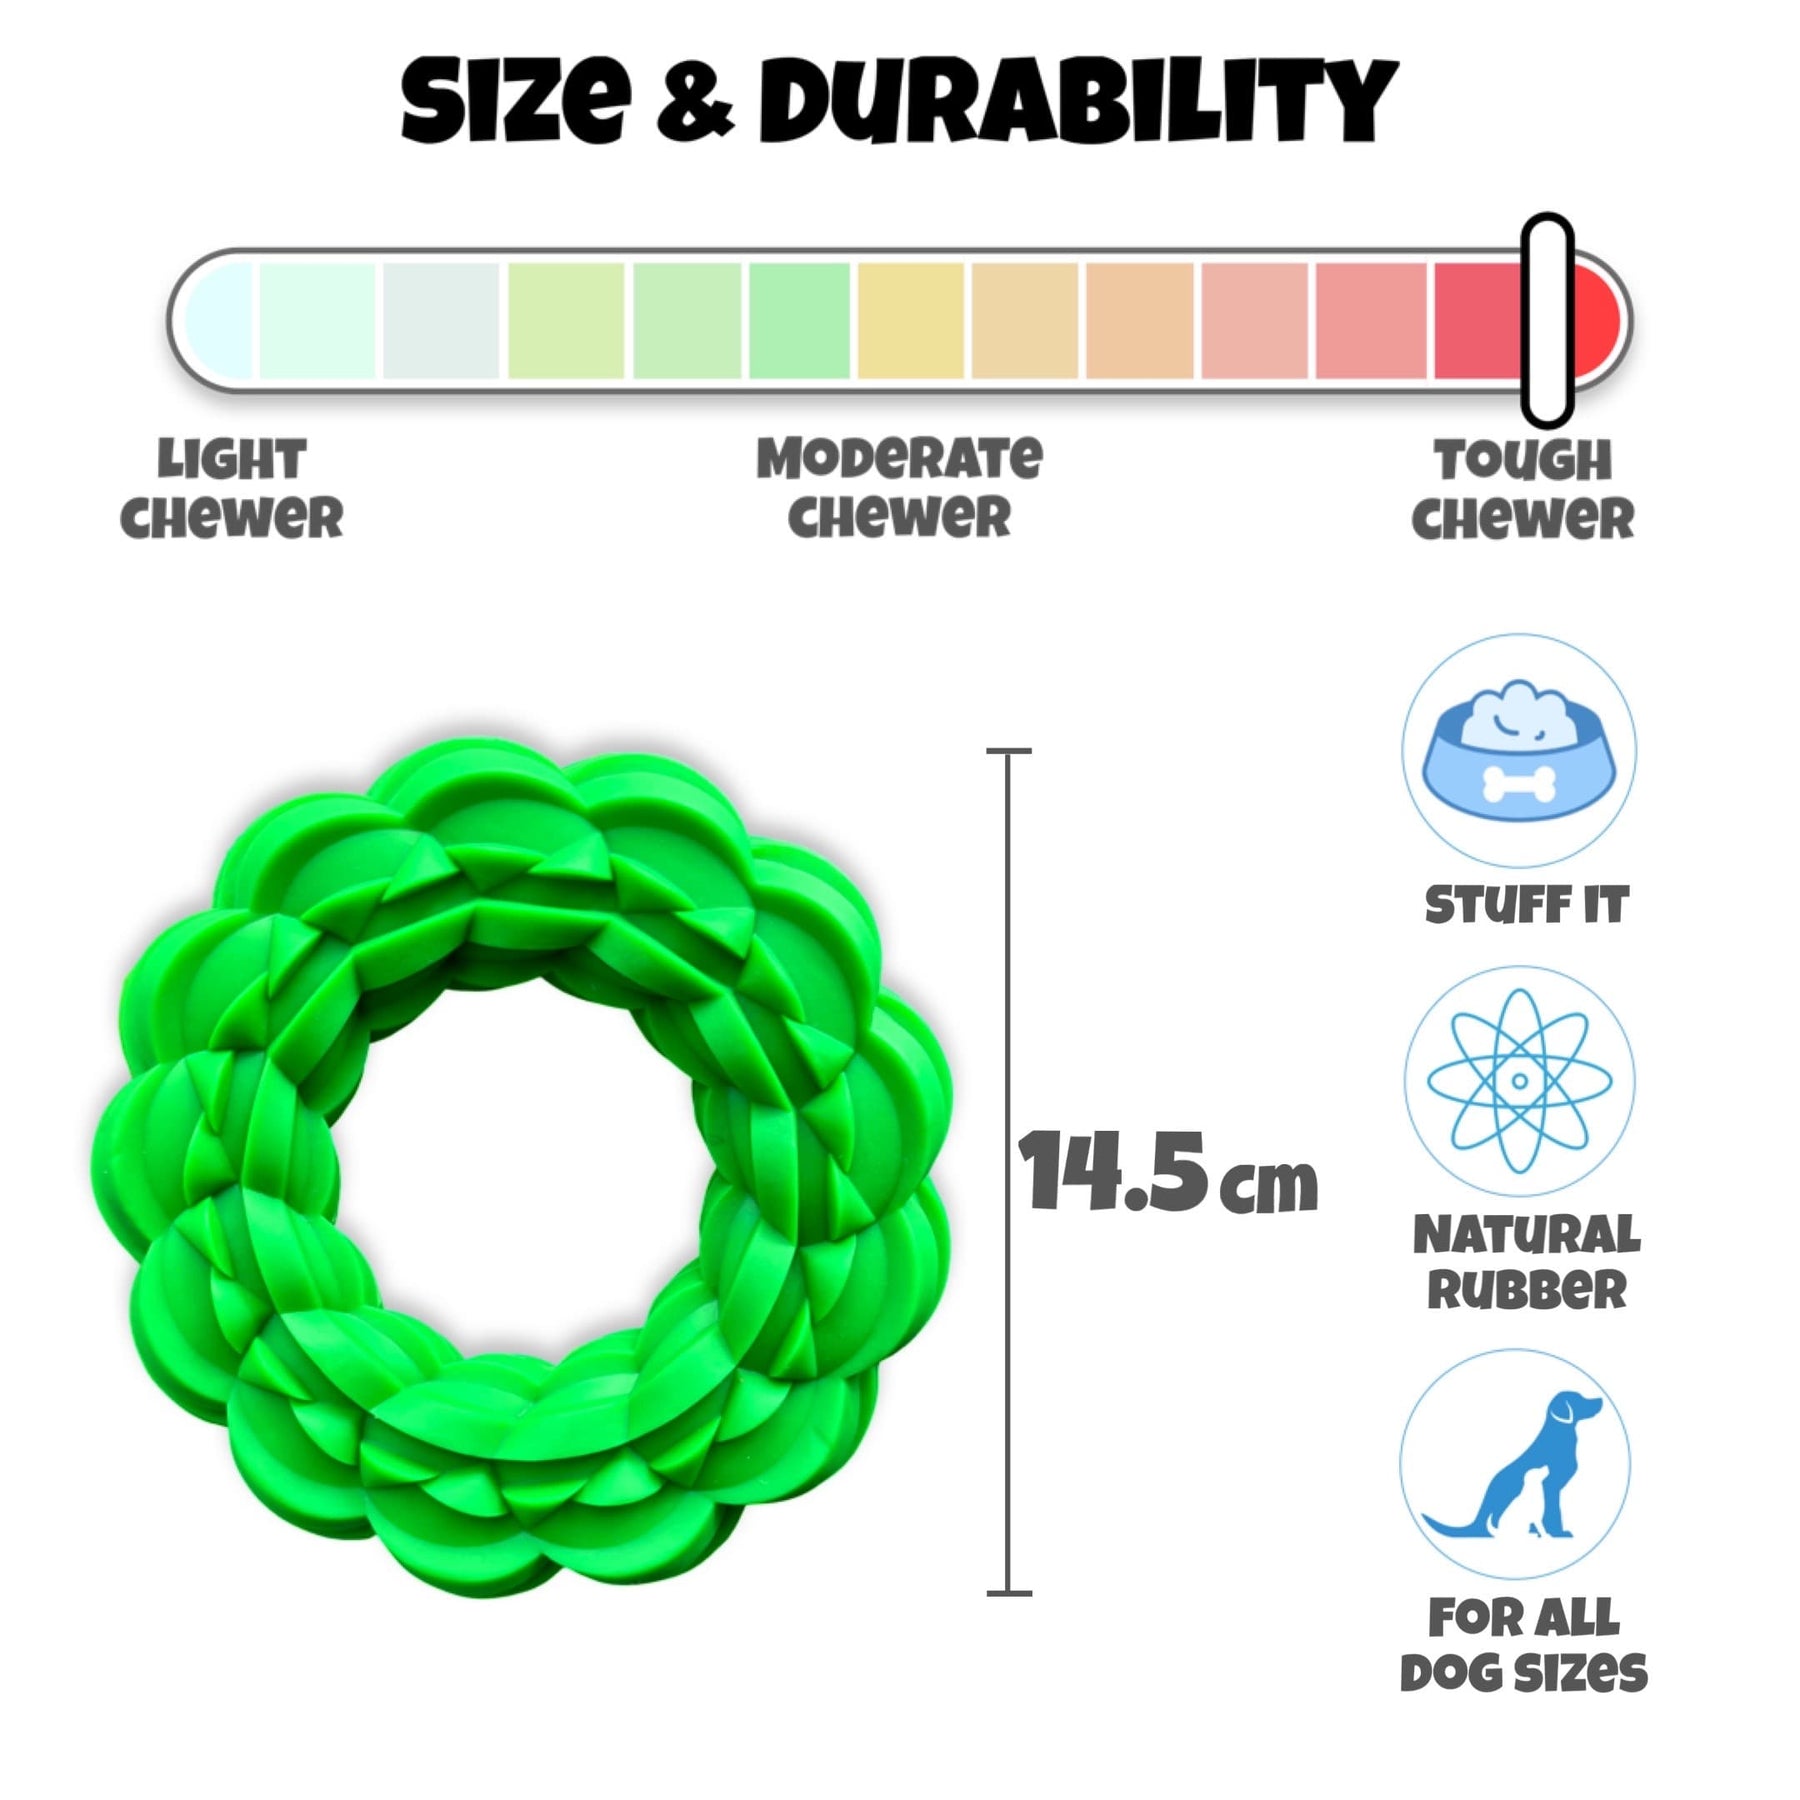 Big Dog Enrichment Toy Rubber Ring Size and Durability Chart